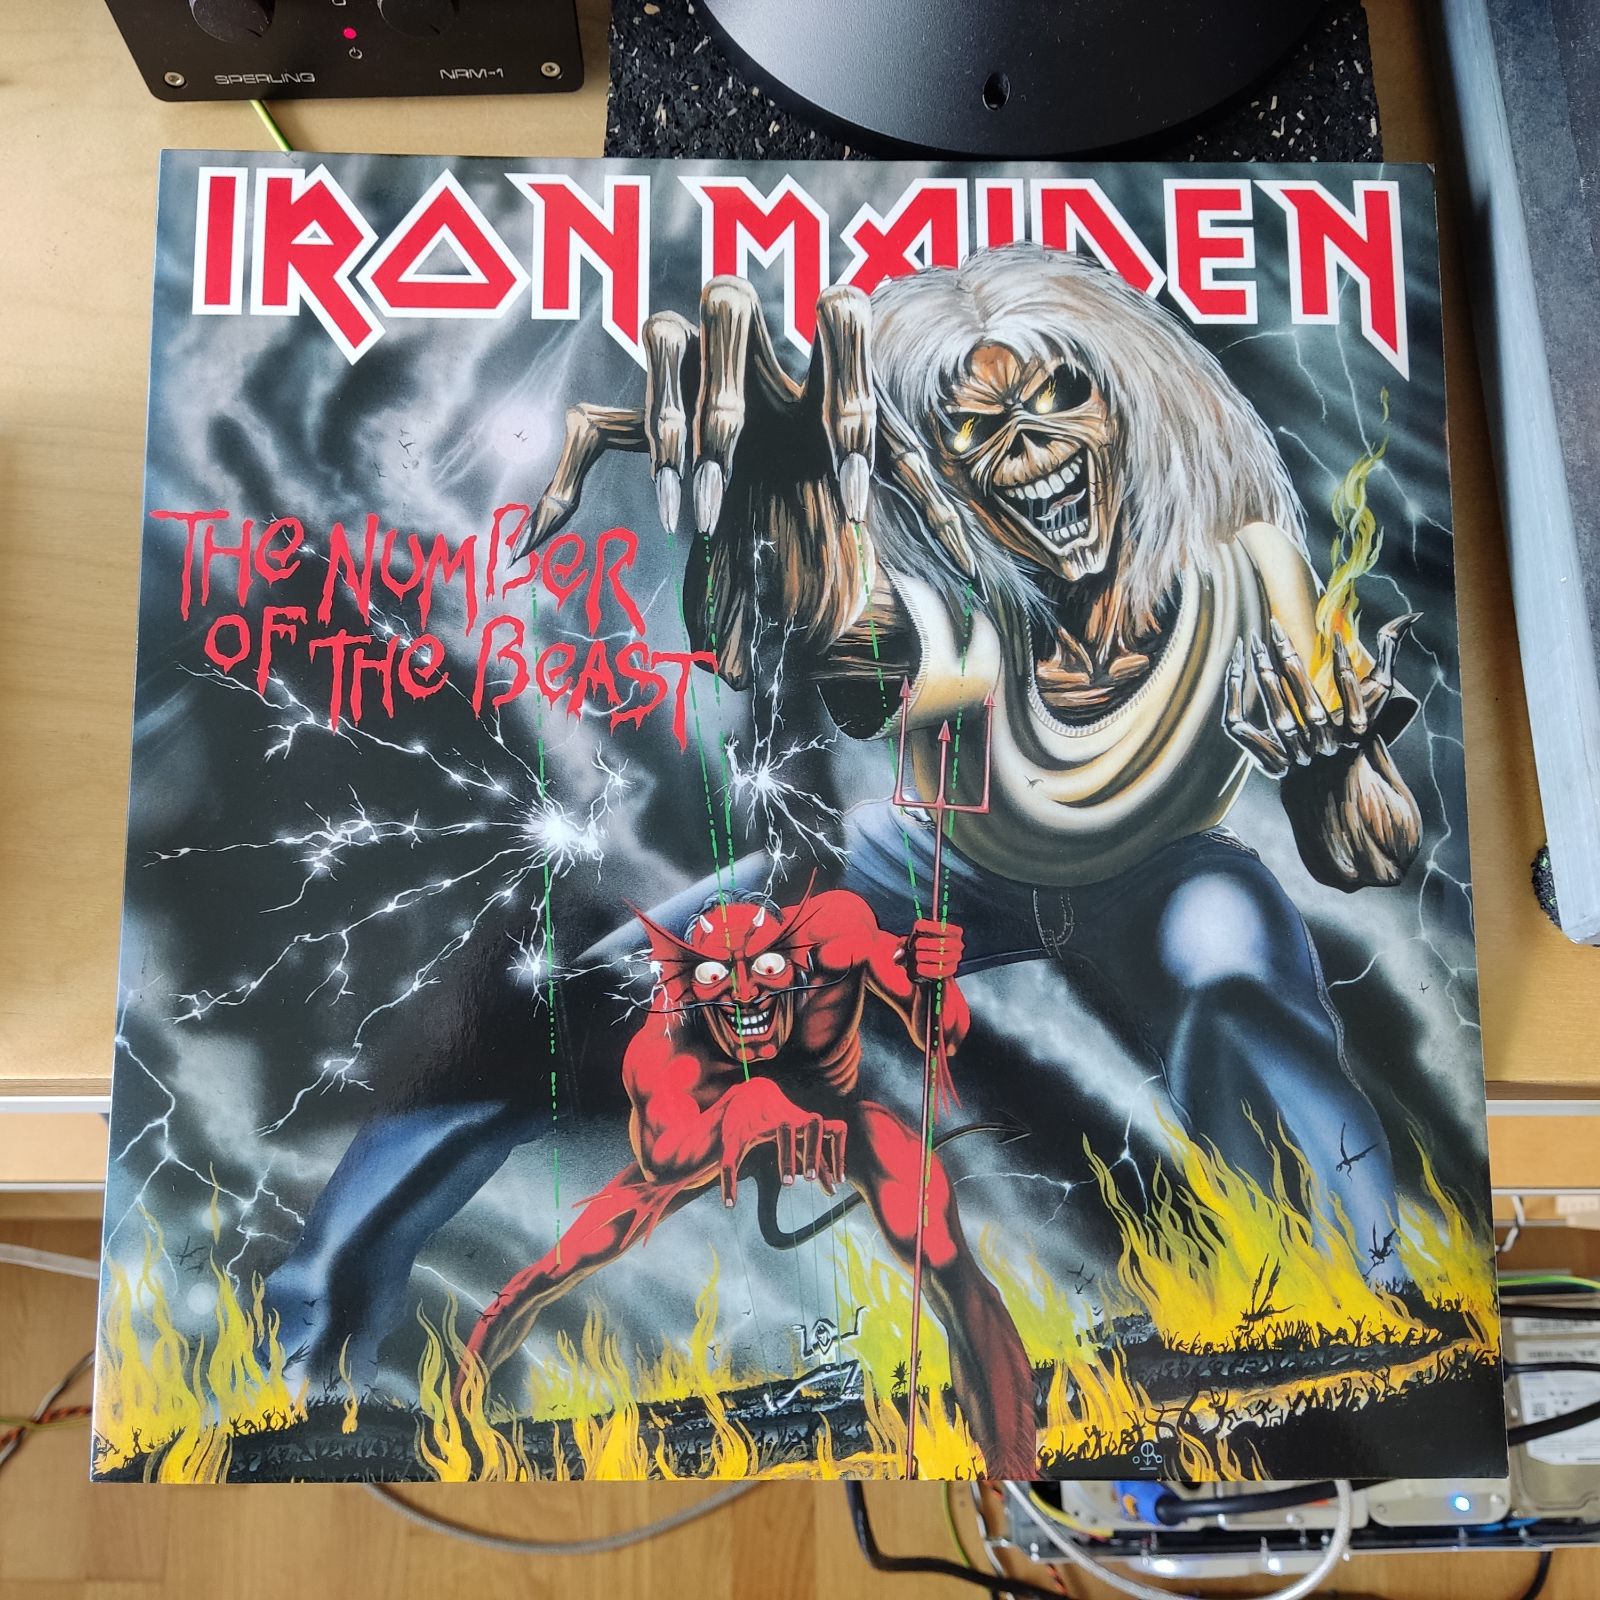 Iron Maiden - The Number of the Beast - 1982